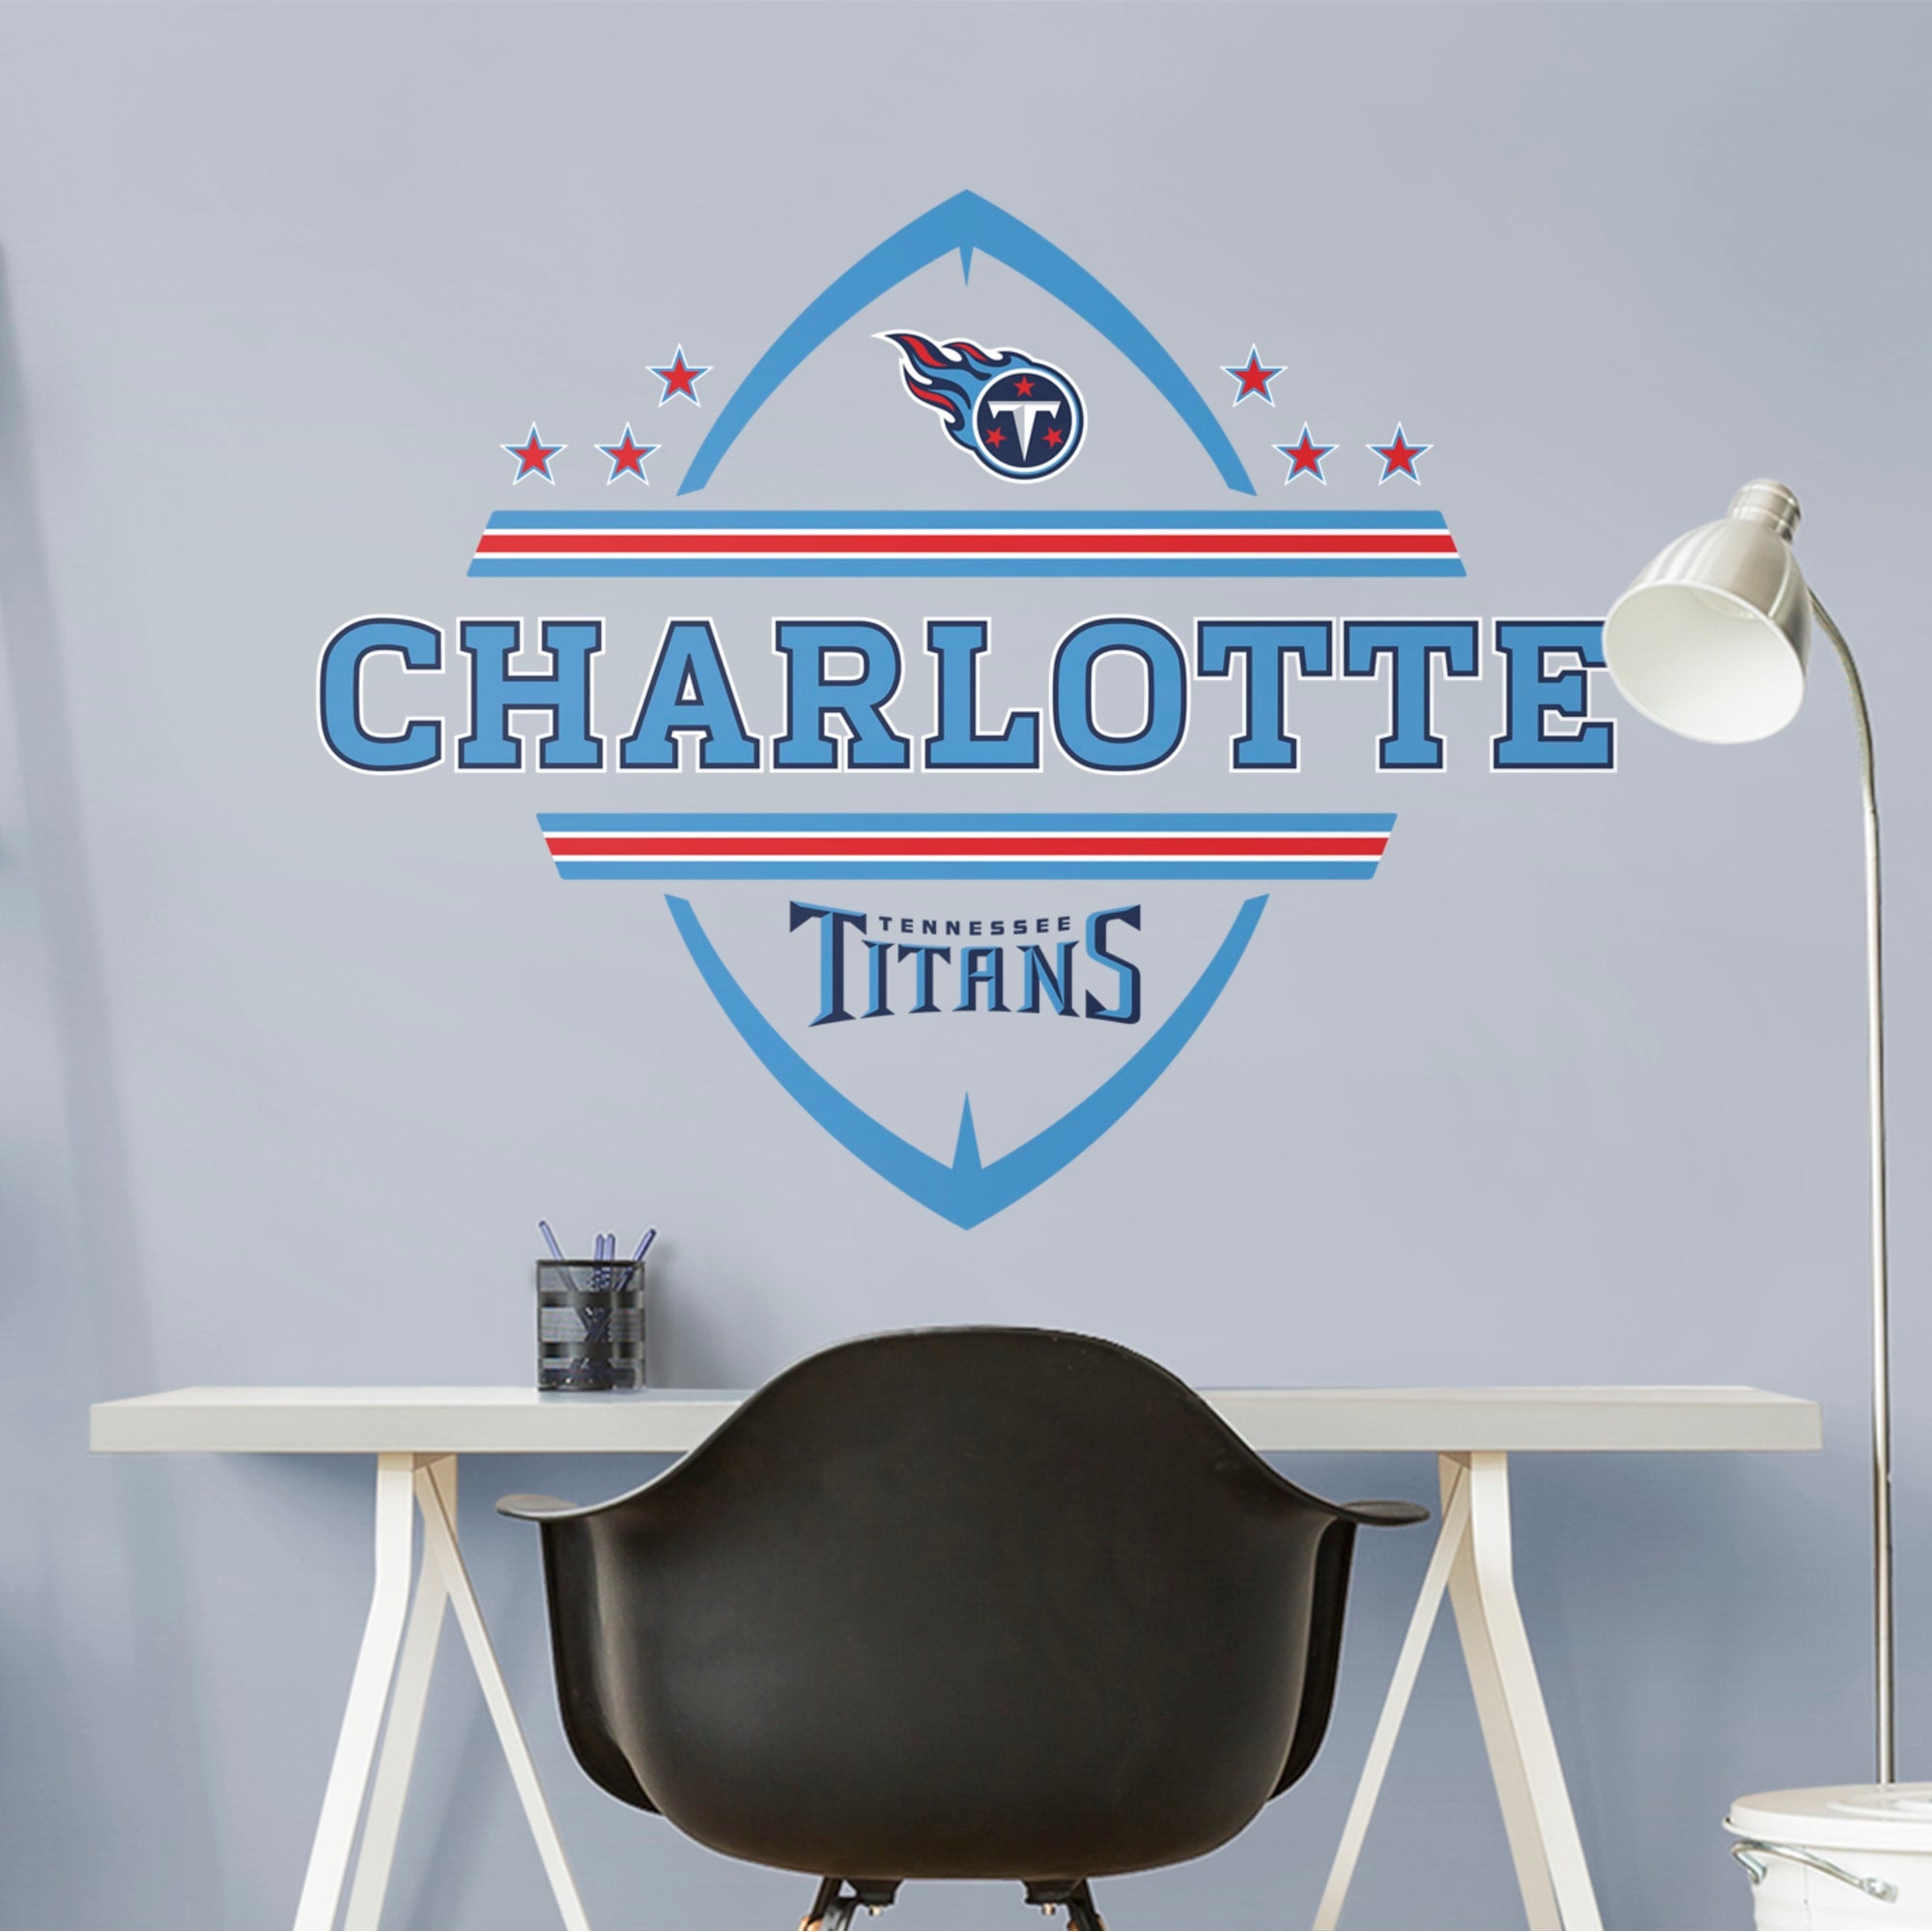 Tennessee Titans: Personalized Name - Officially Licensed NFL Transfer Decal 51.0"W x 38.0"H by Fathead | Vinyl